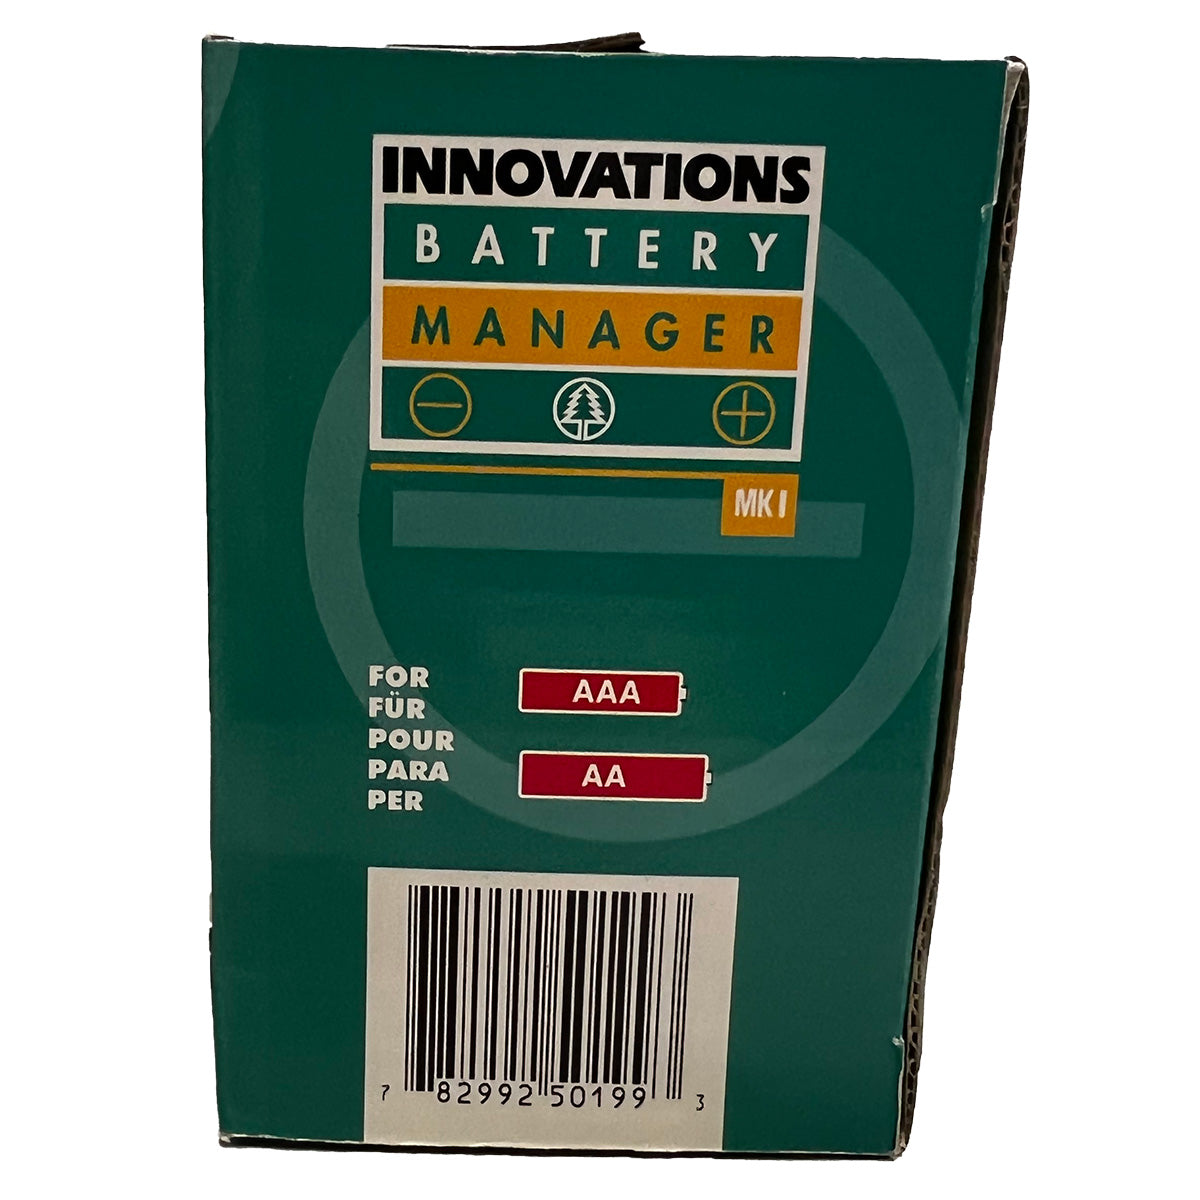 Innovations Battery Manager